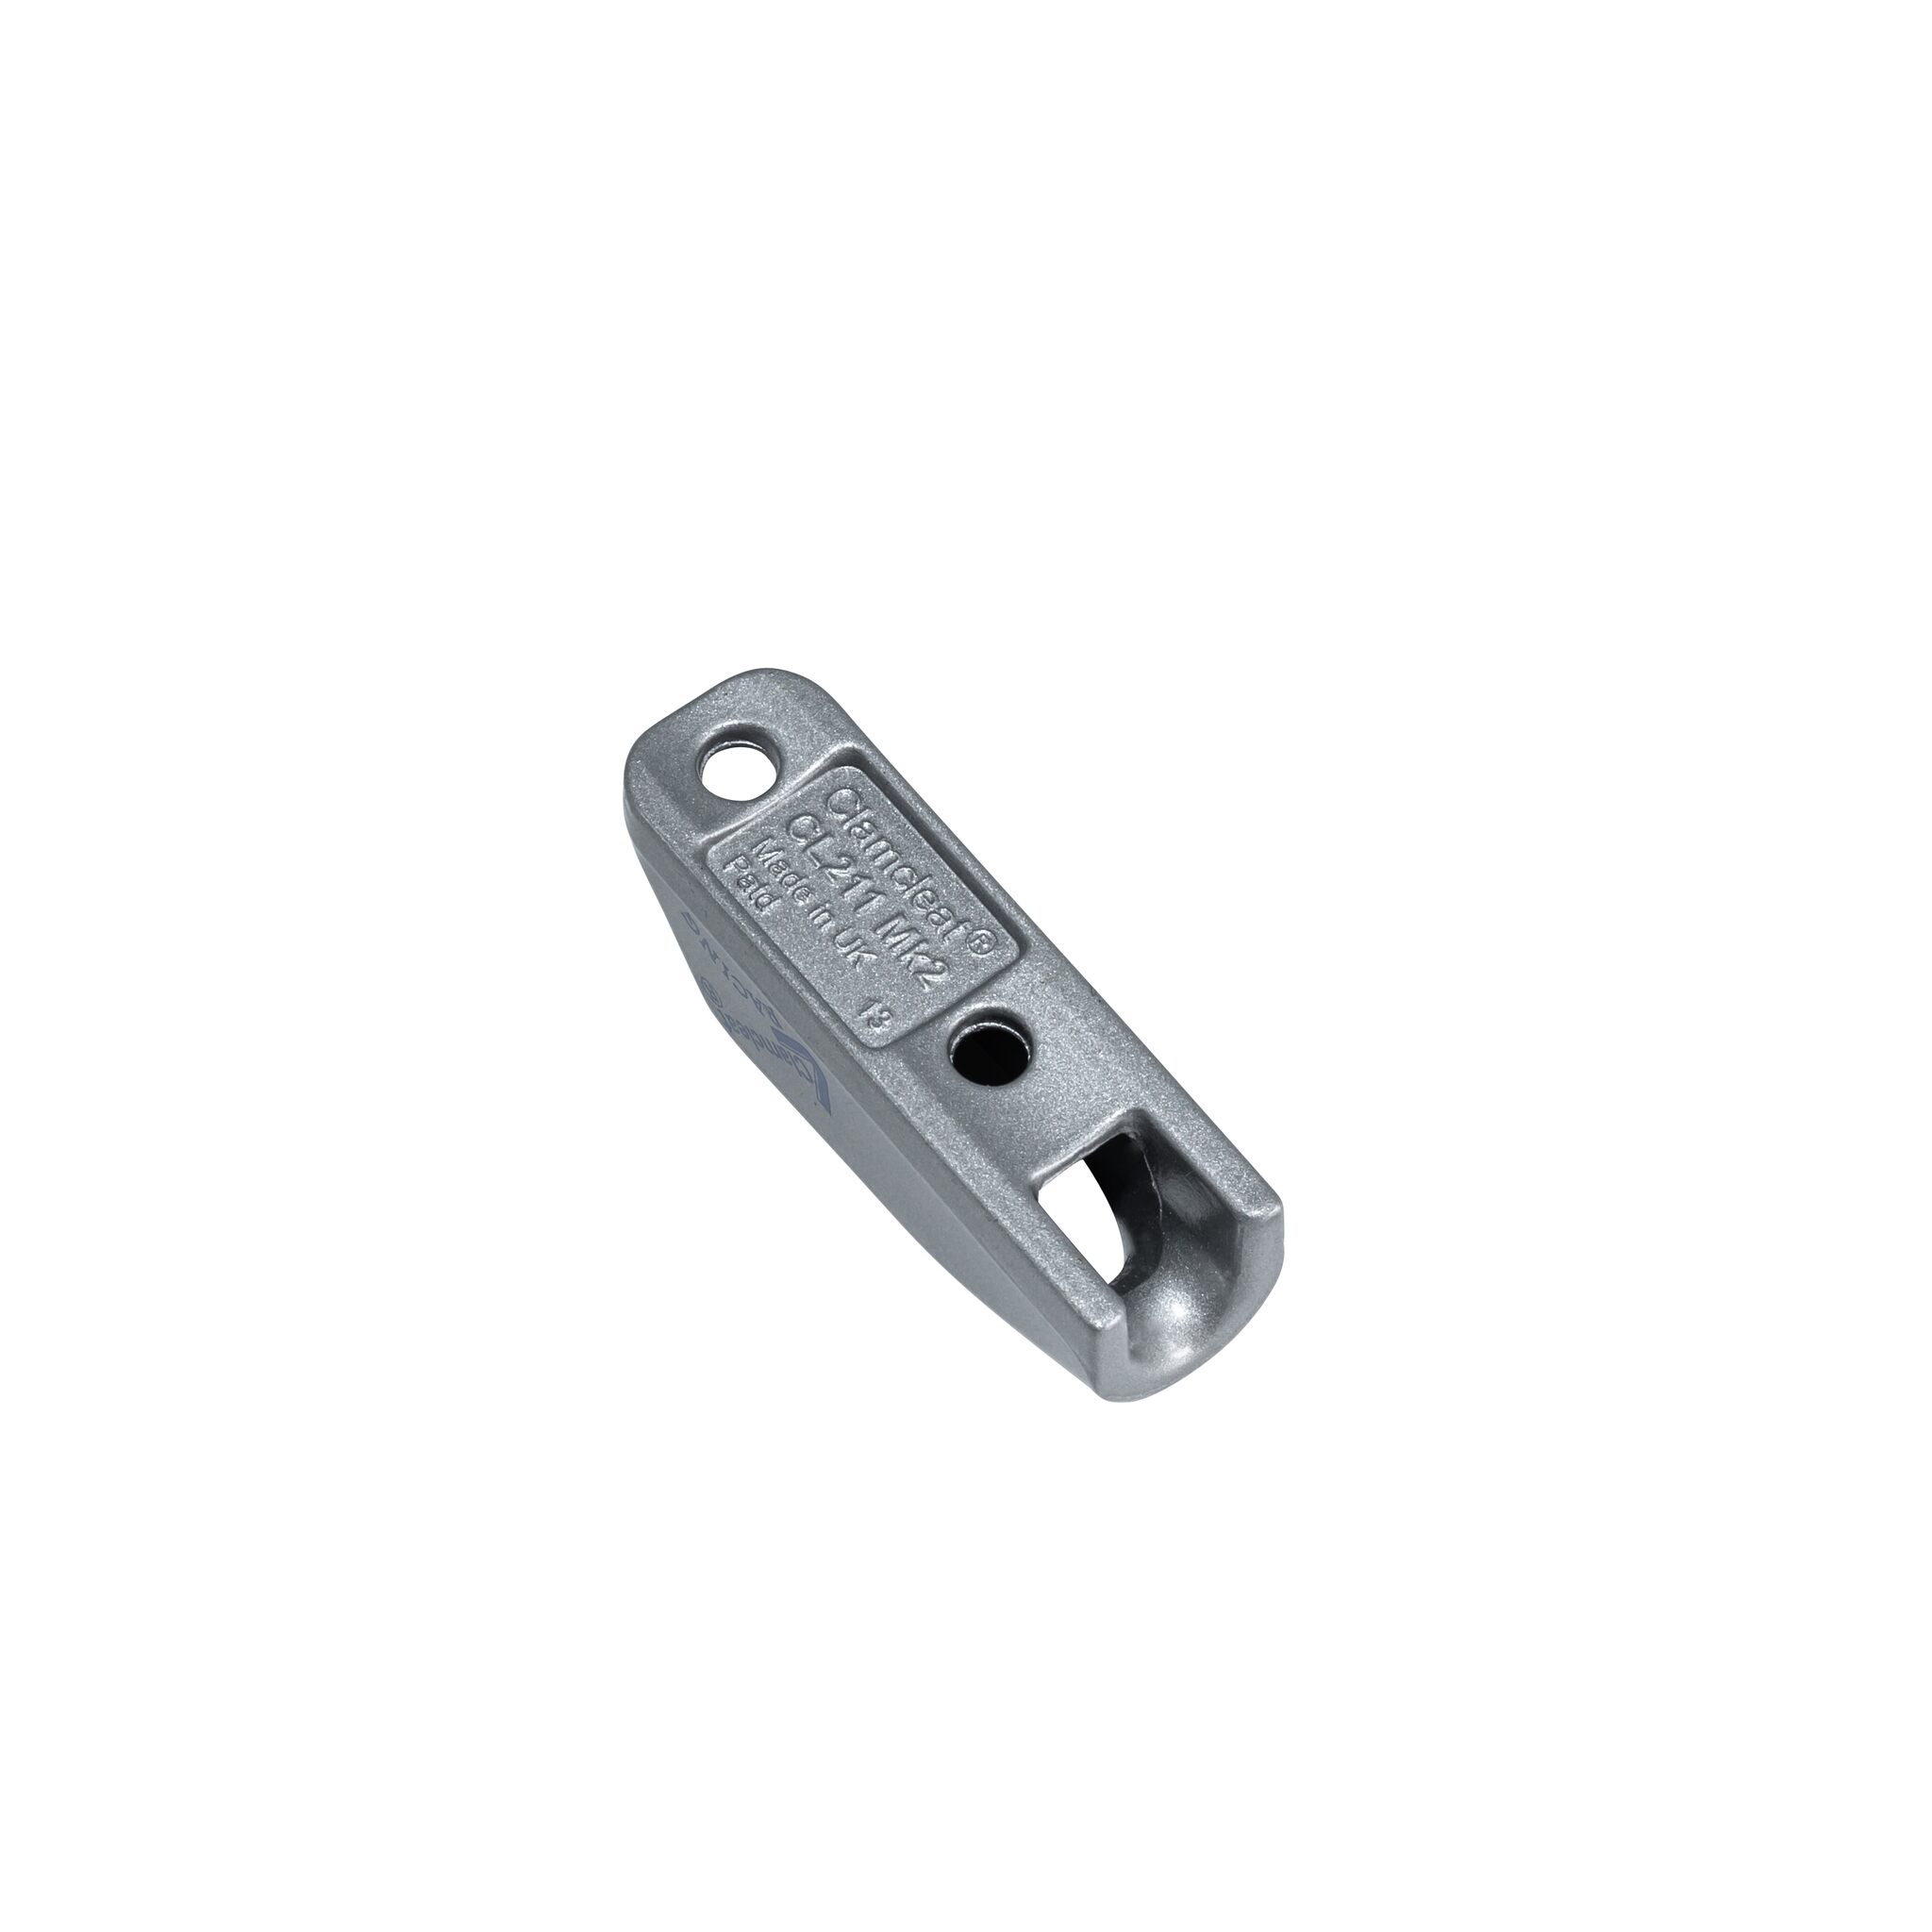 Clamcleat rope clamps with bar, short